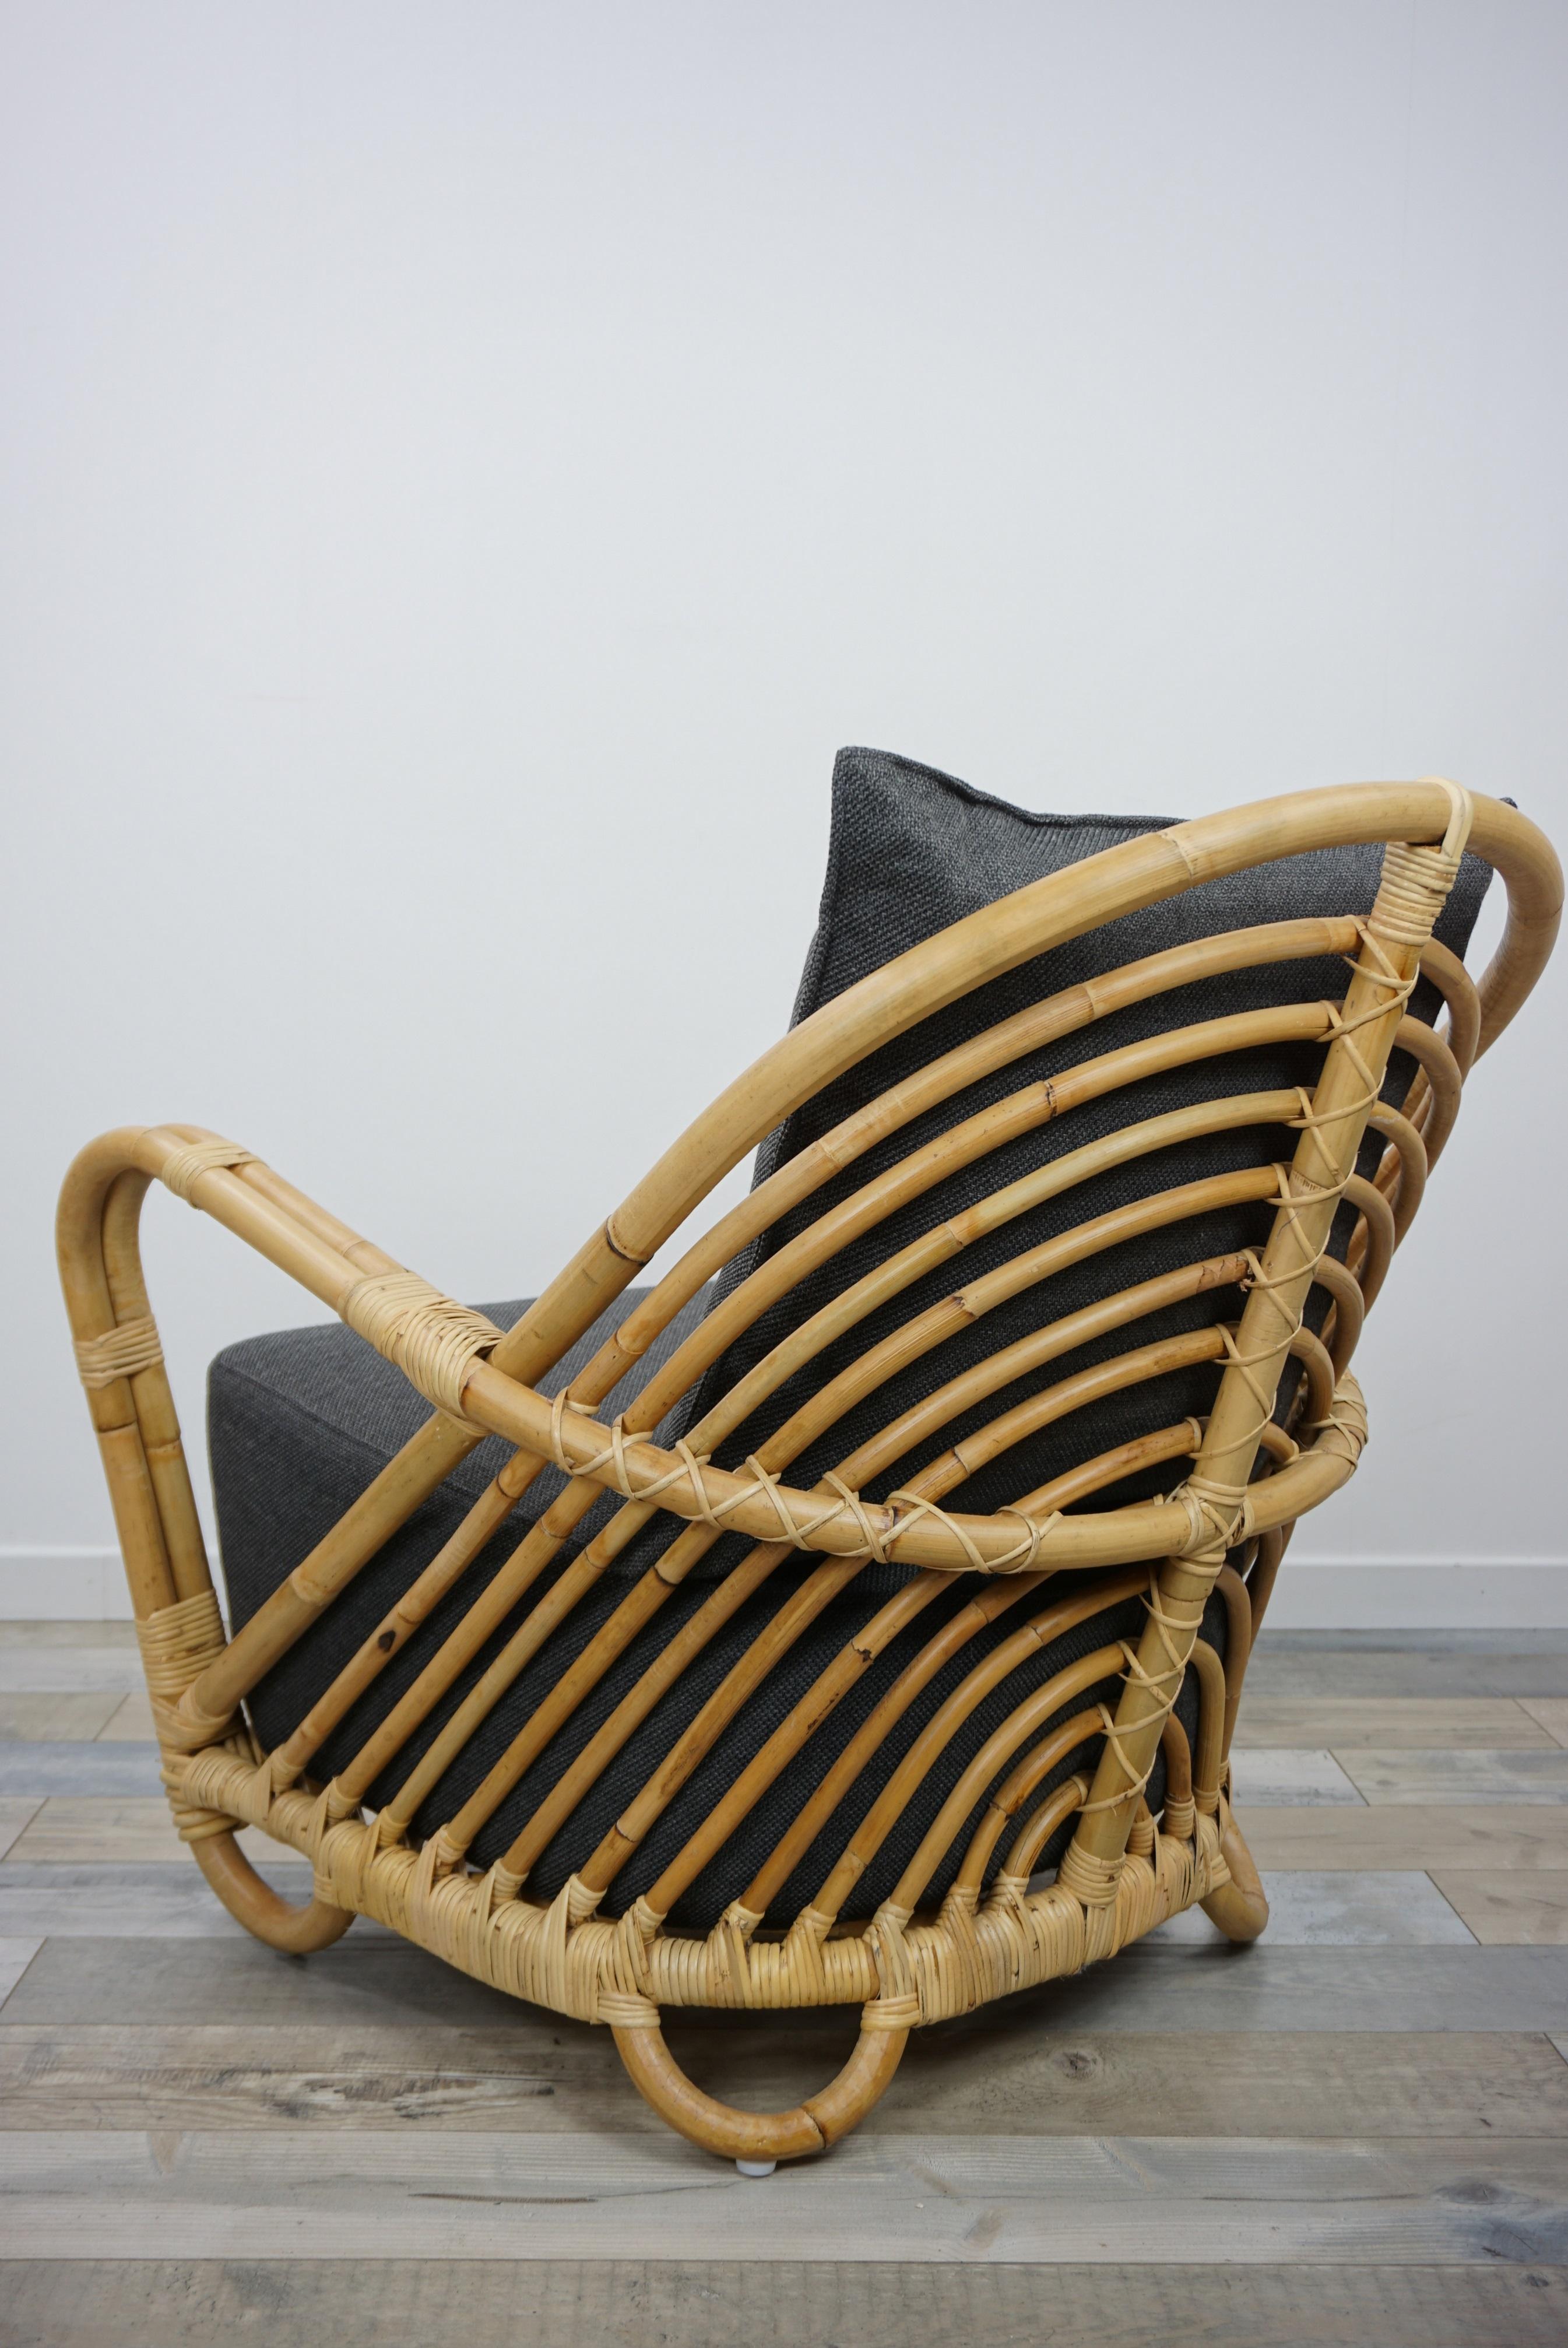 1930s Arne Jacobsen Design Rattan Lounge Armchair In New Condition For Sale In Tourcoing, FR